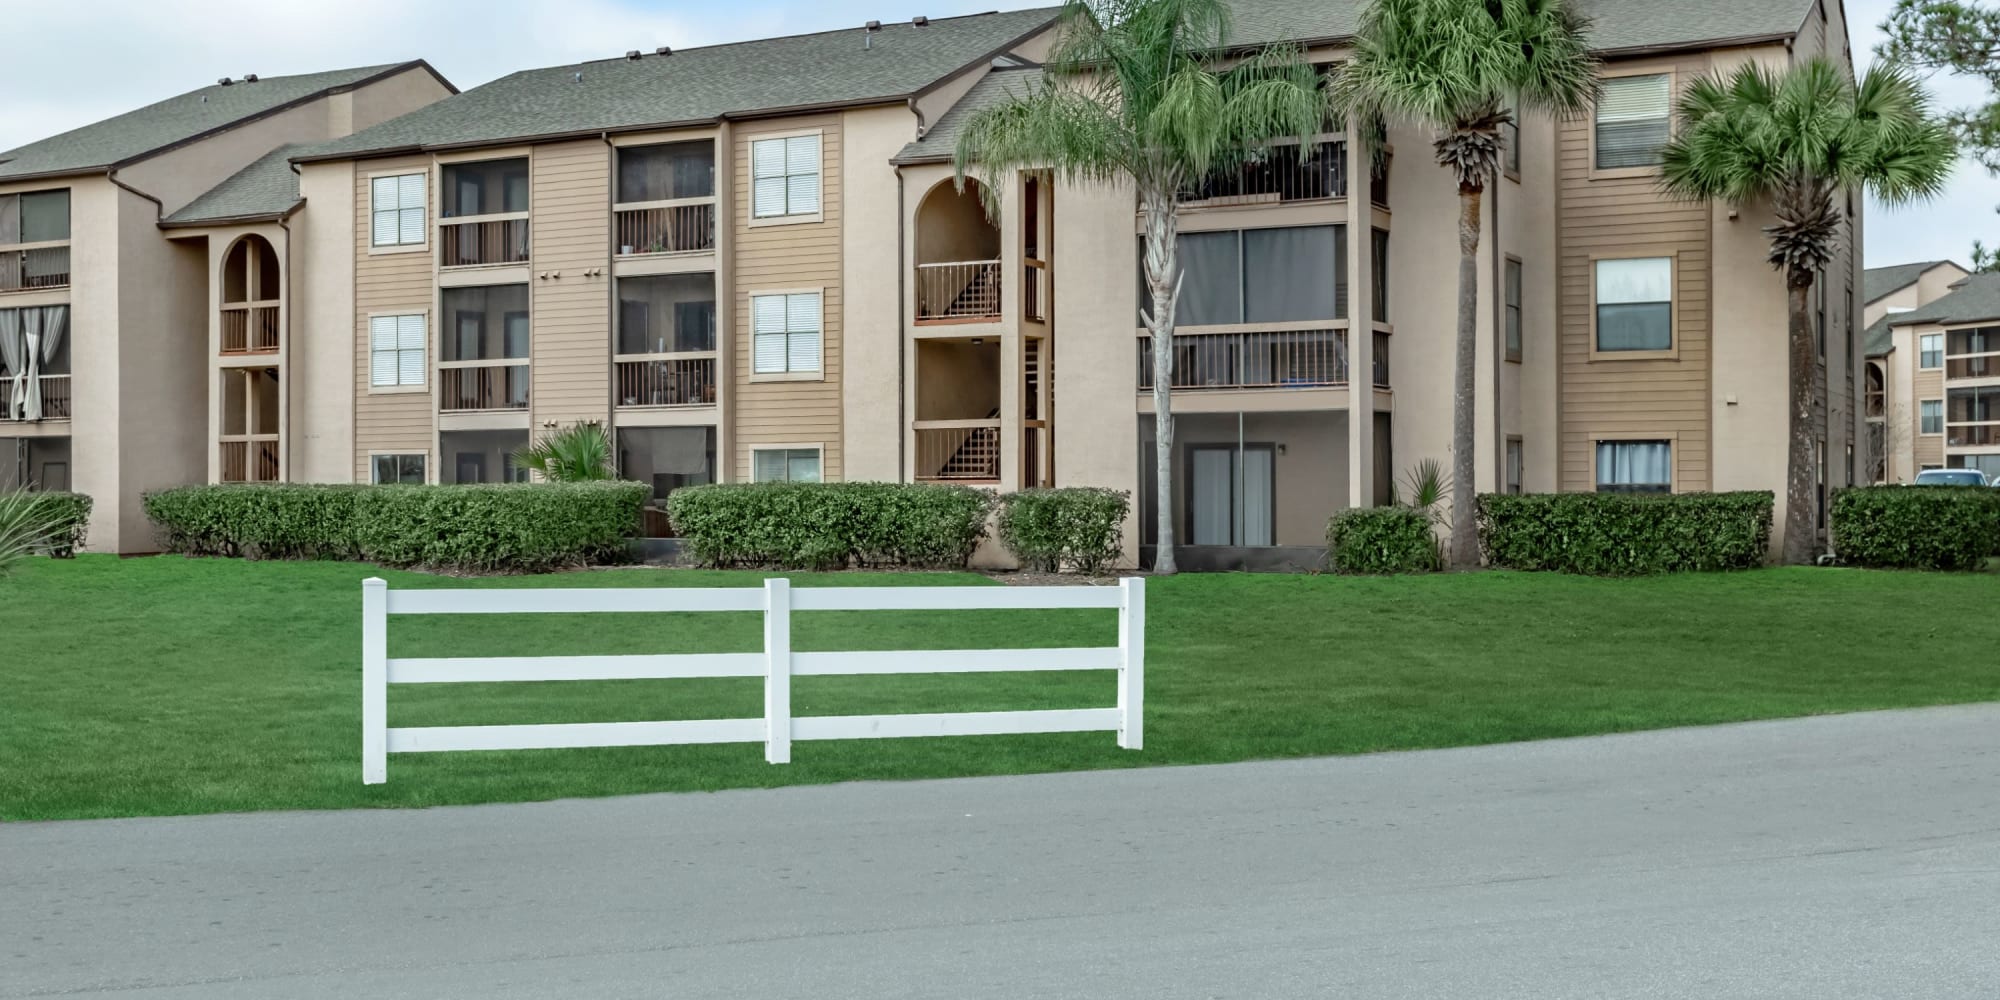 The community at The Cascades at Kissimmee in Kissimmee, Florida